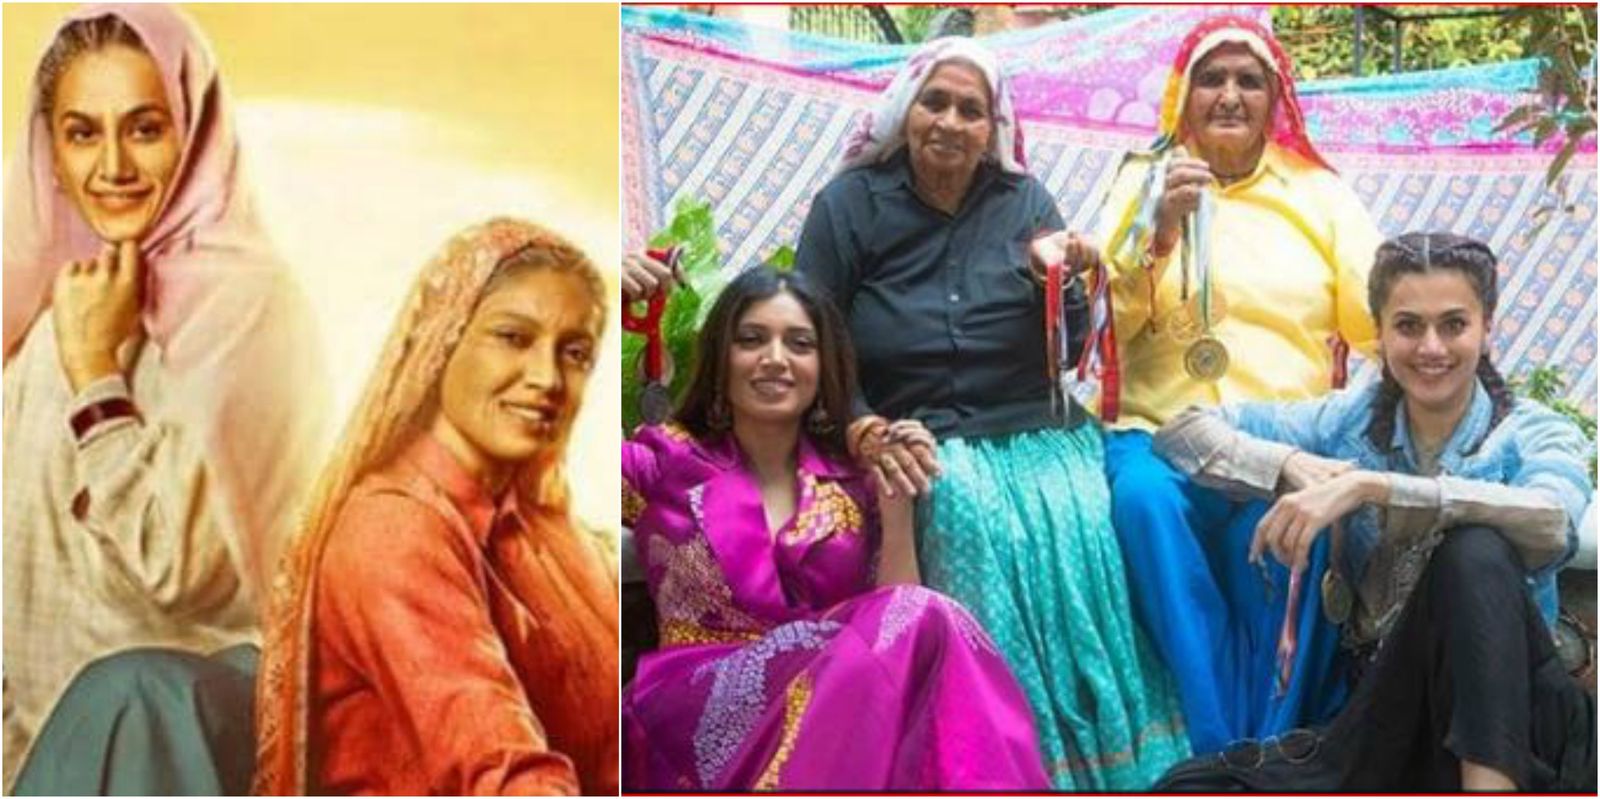 Taapsee Pannu Hits Back At People For Trolling Her For Playing Older Character In Saand Ki Aankh